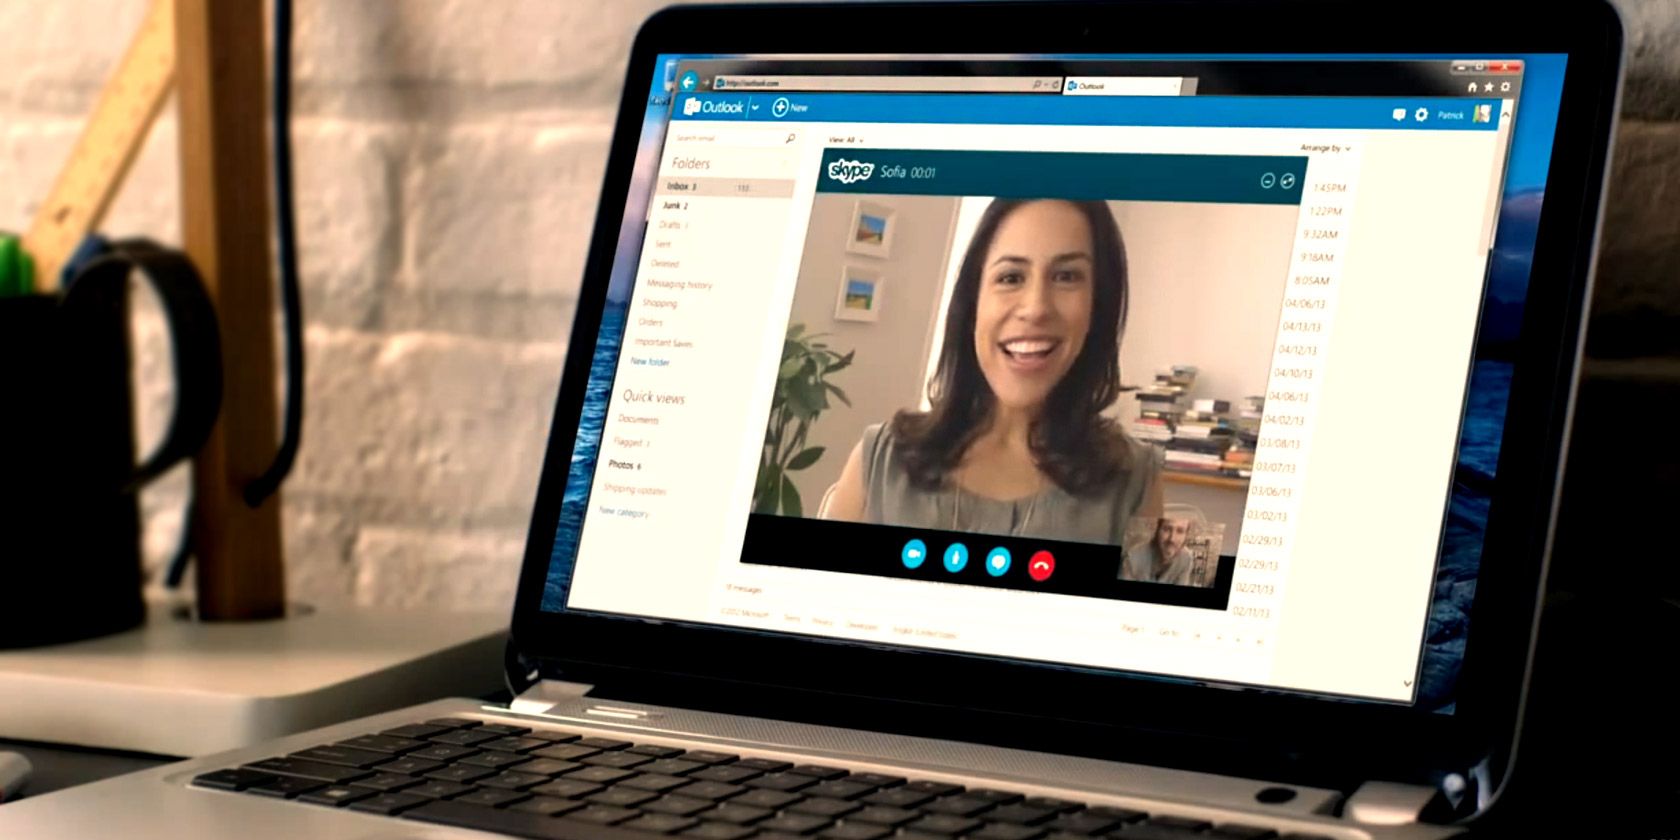 Common Skype Problems and how to solve them